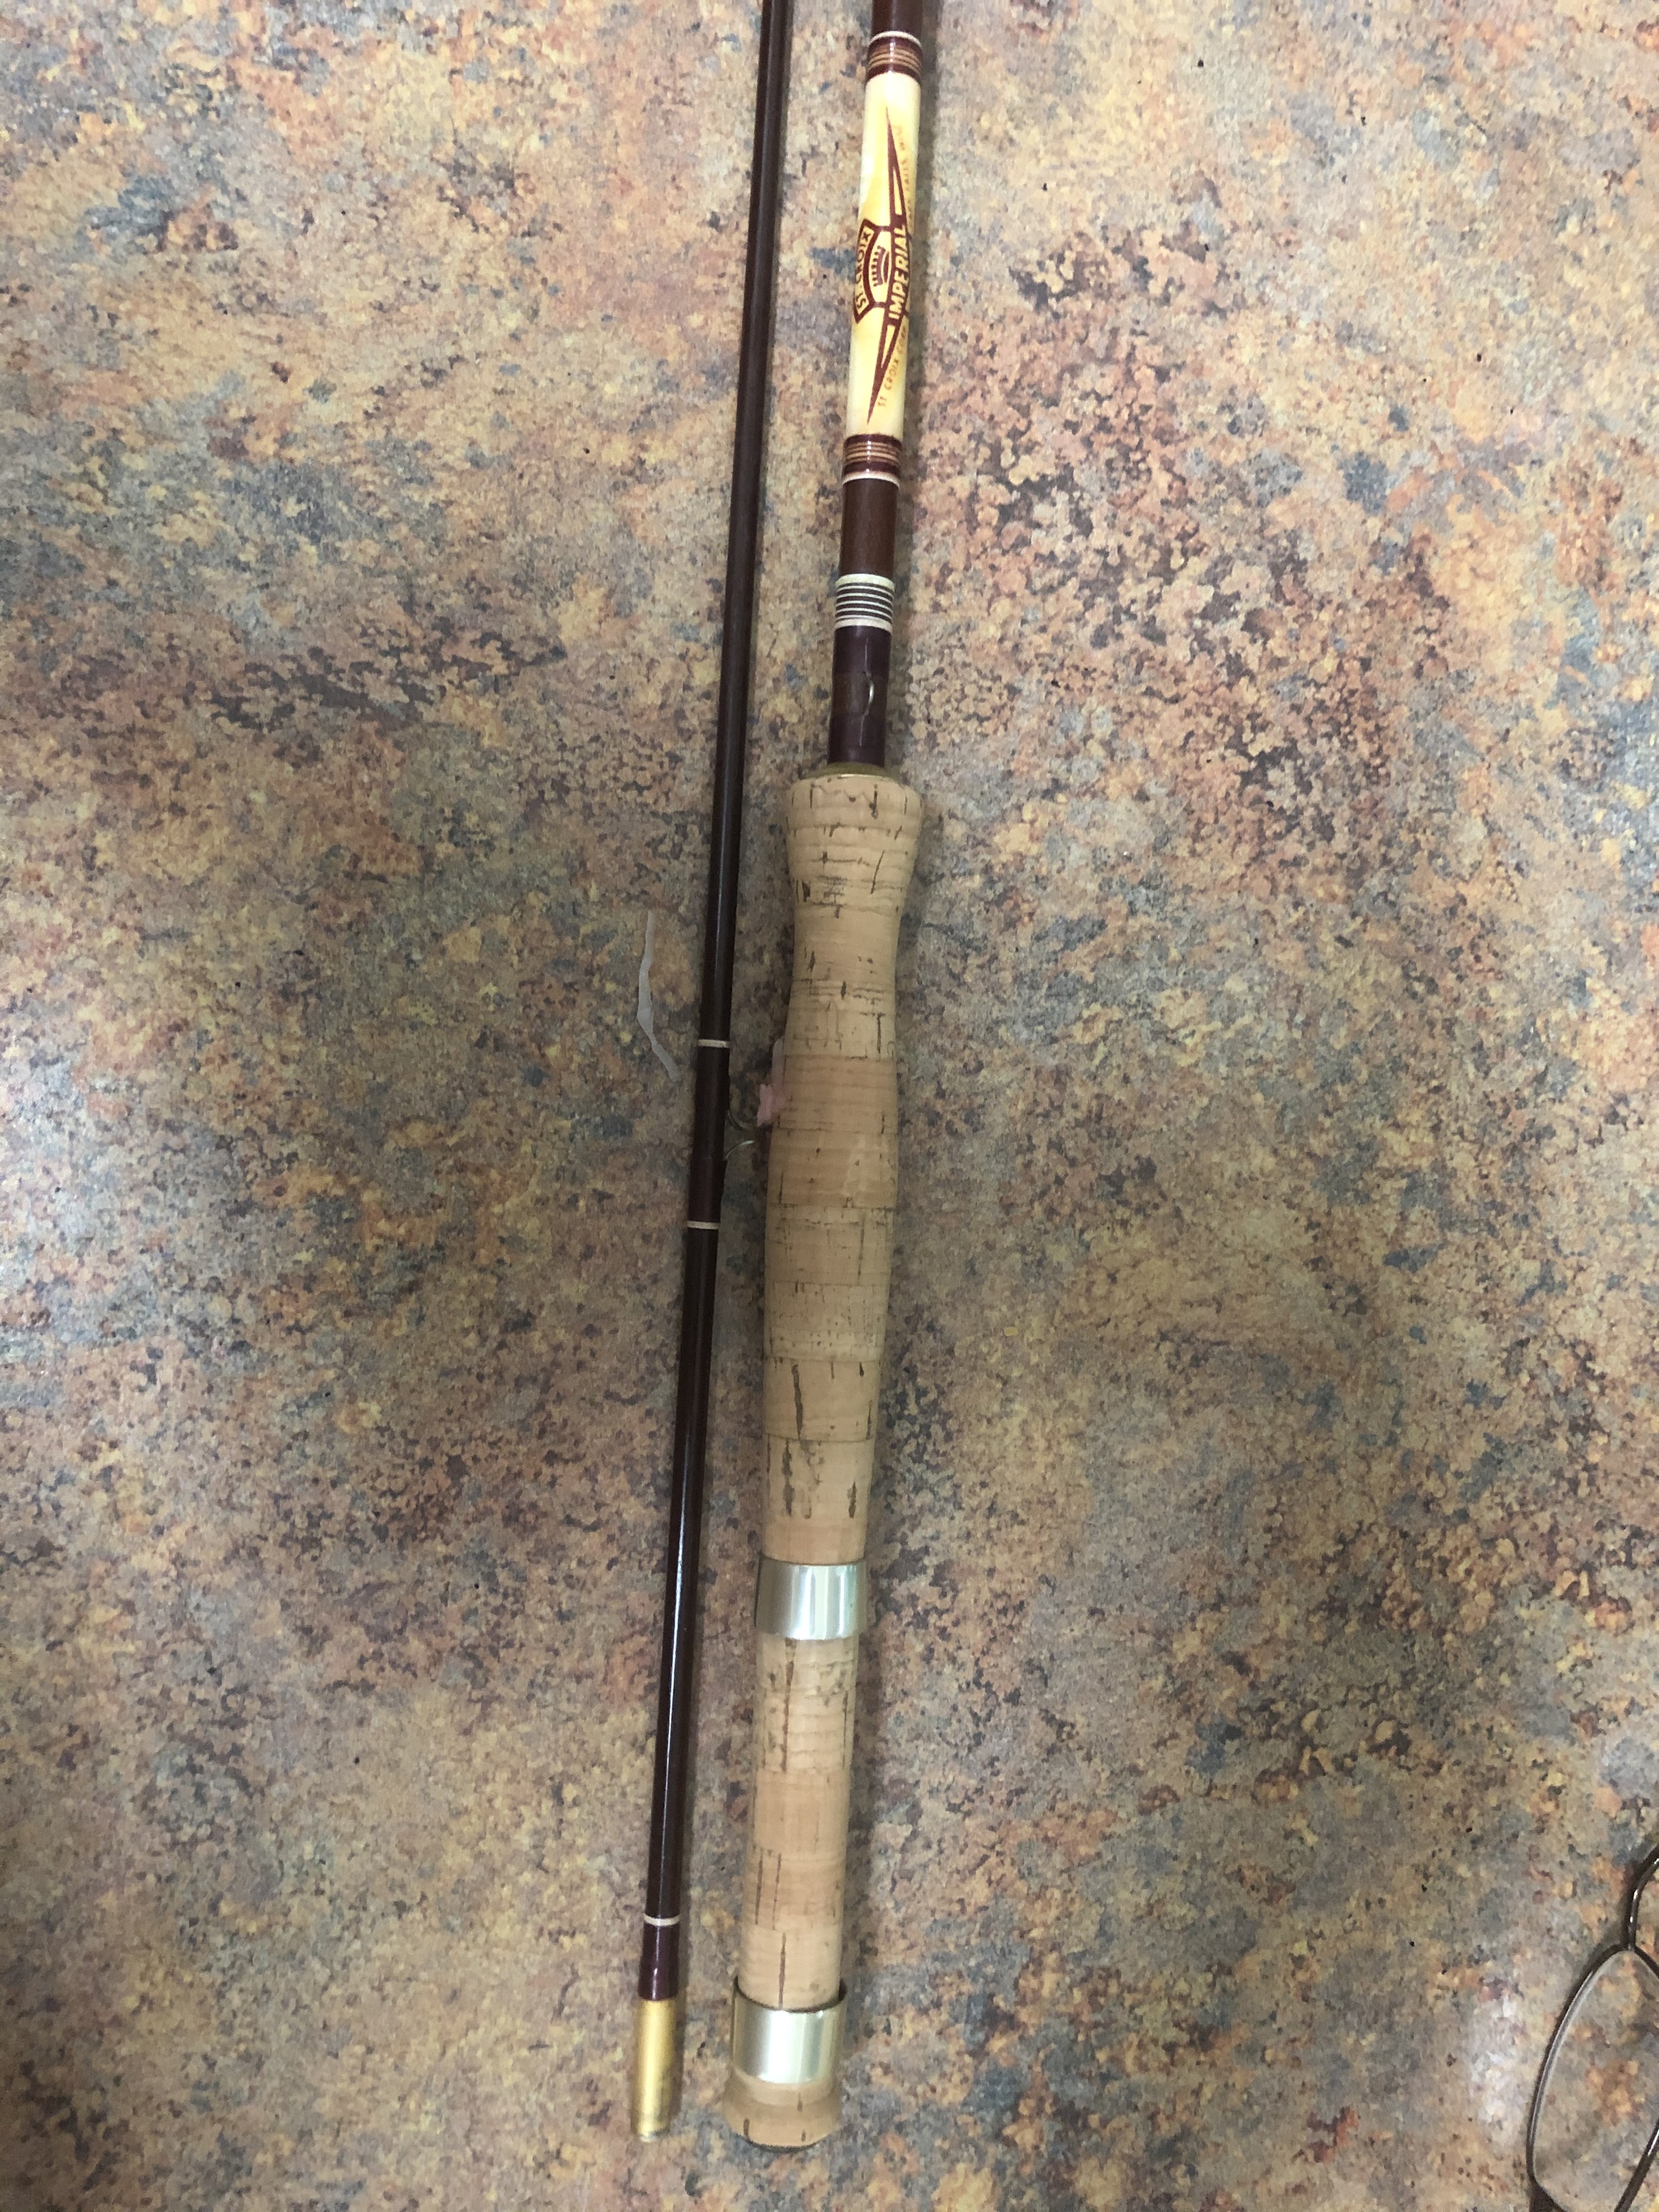 St Croix imperial ultra light  Collecting Fiberglass Fly Rods